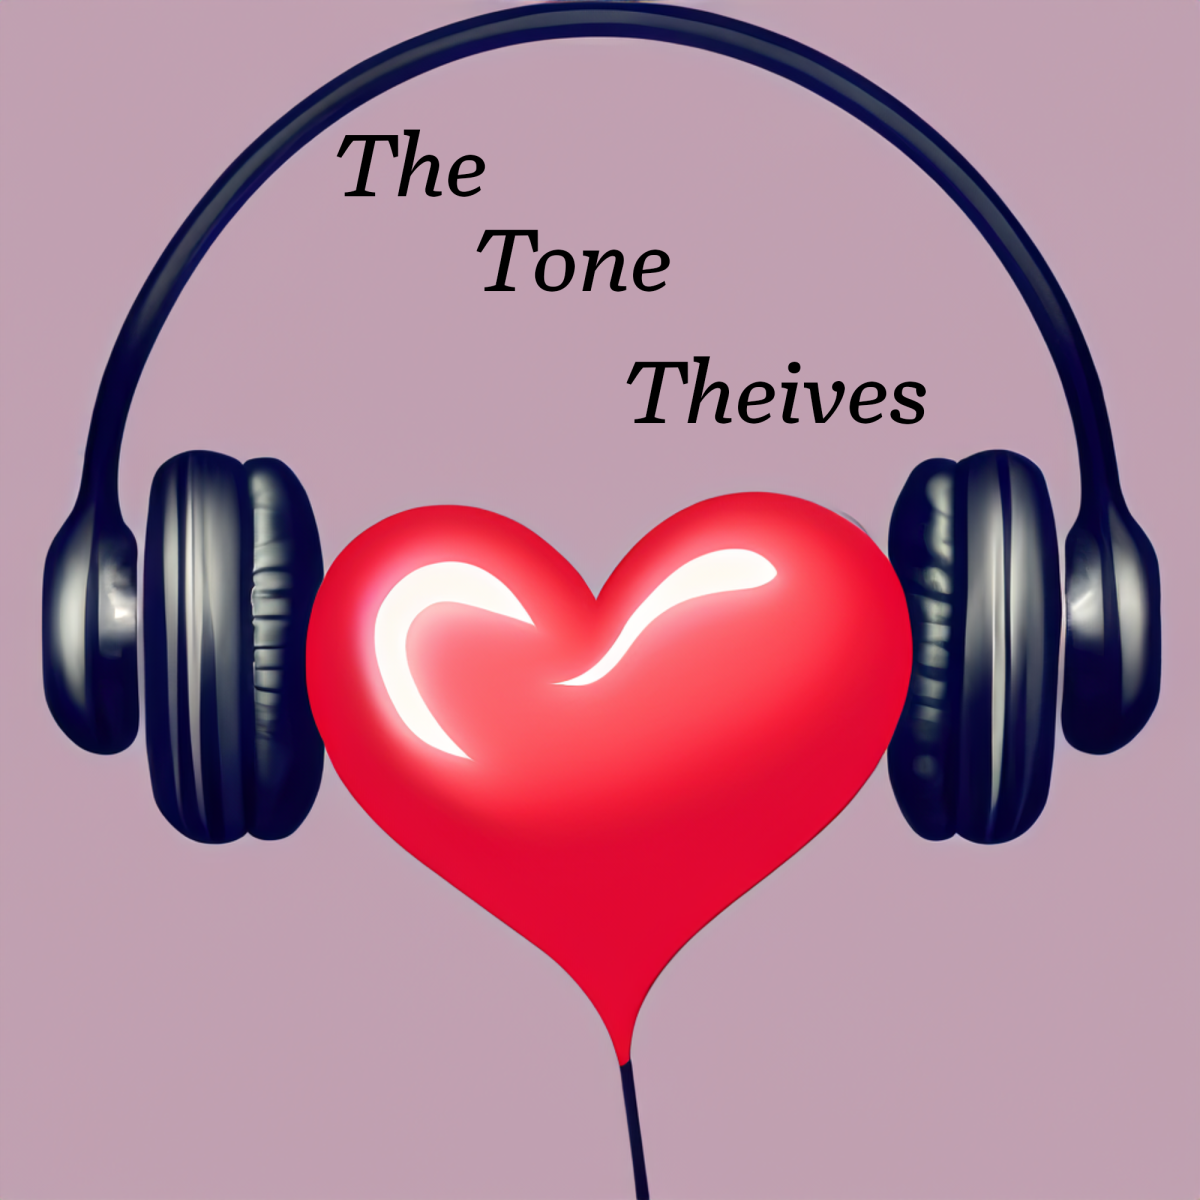 The Tone Thieves